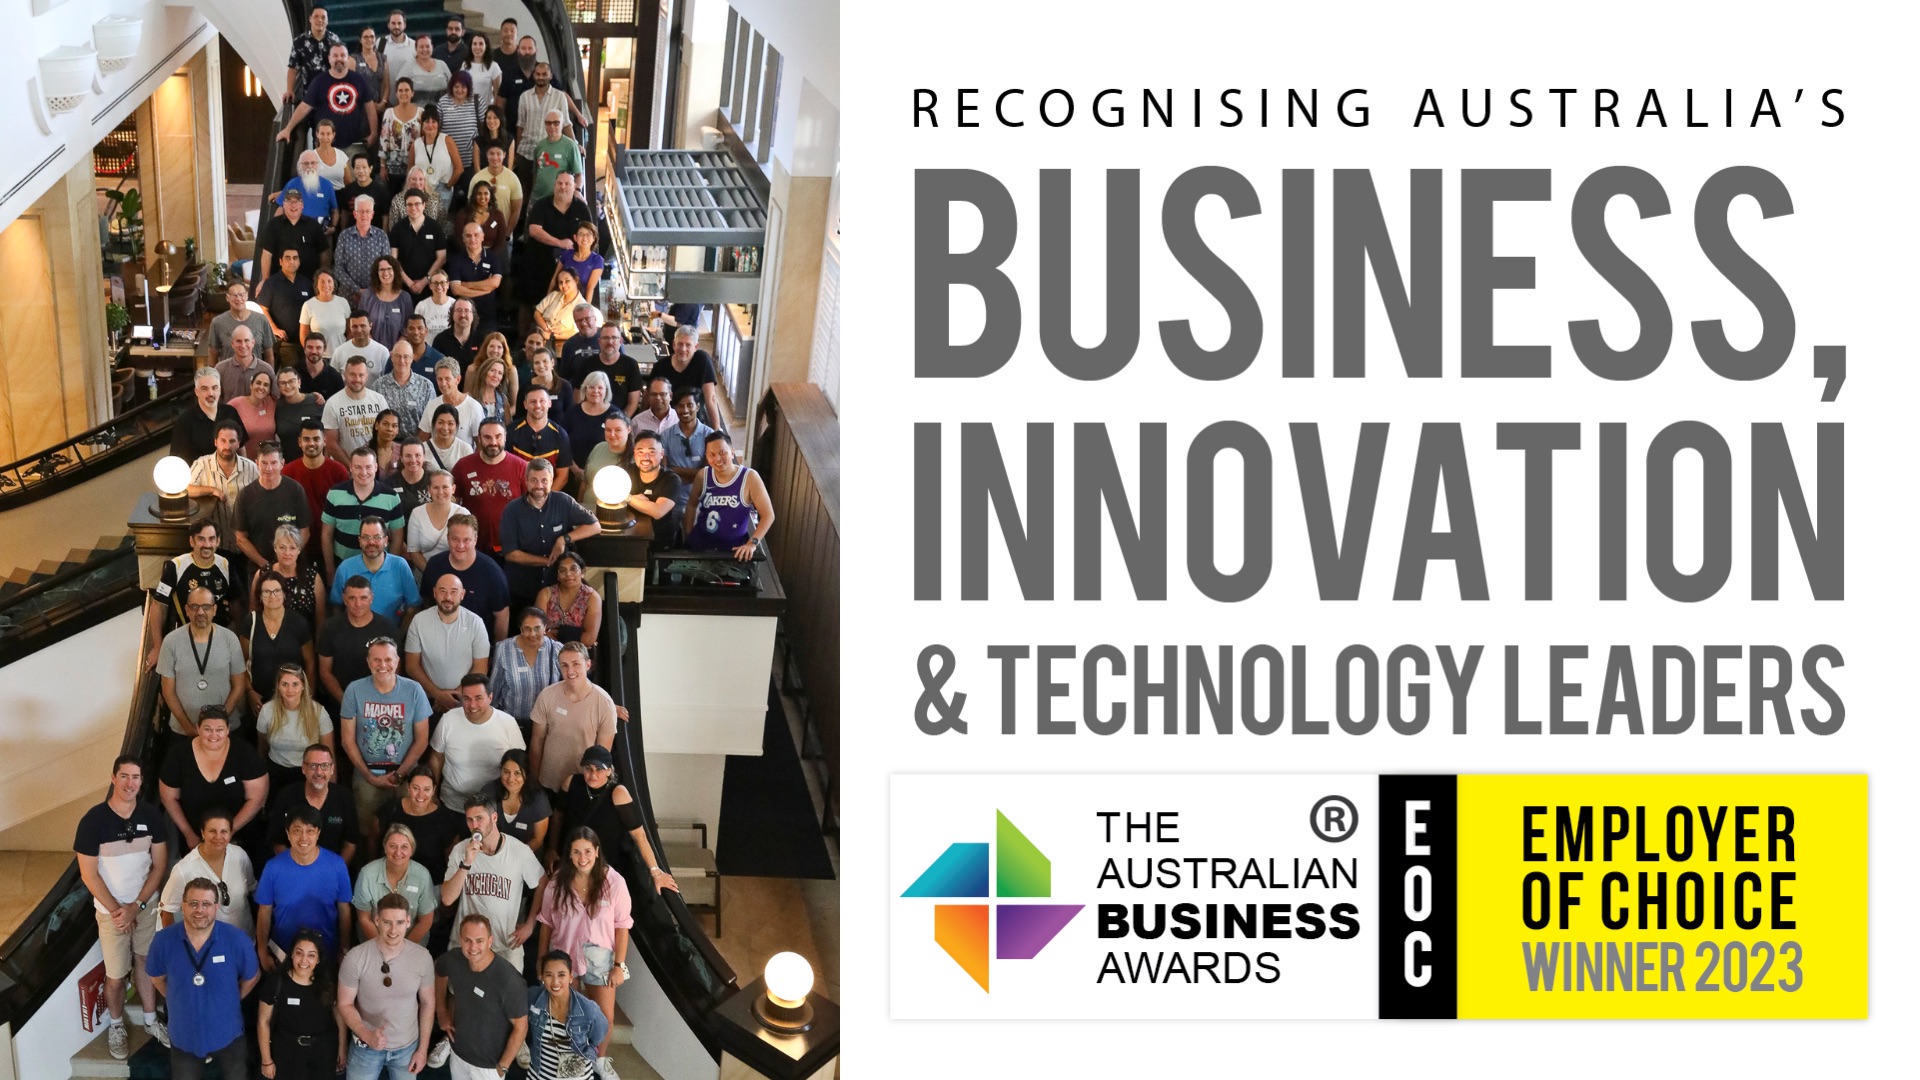 LFY - Work - Blog Image 1920 x 1080 - Lumify Group named an Employer of Choice by The Australian Business Awards 2023